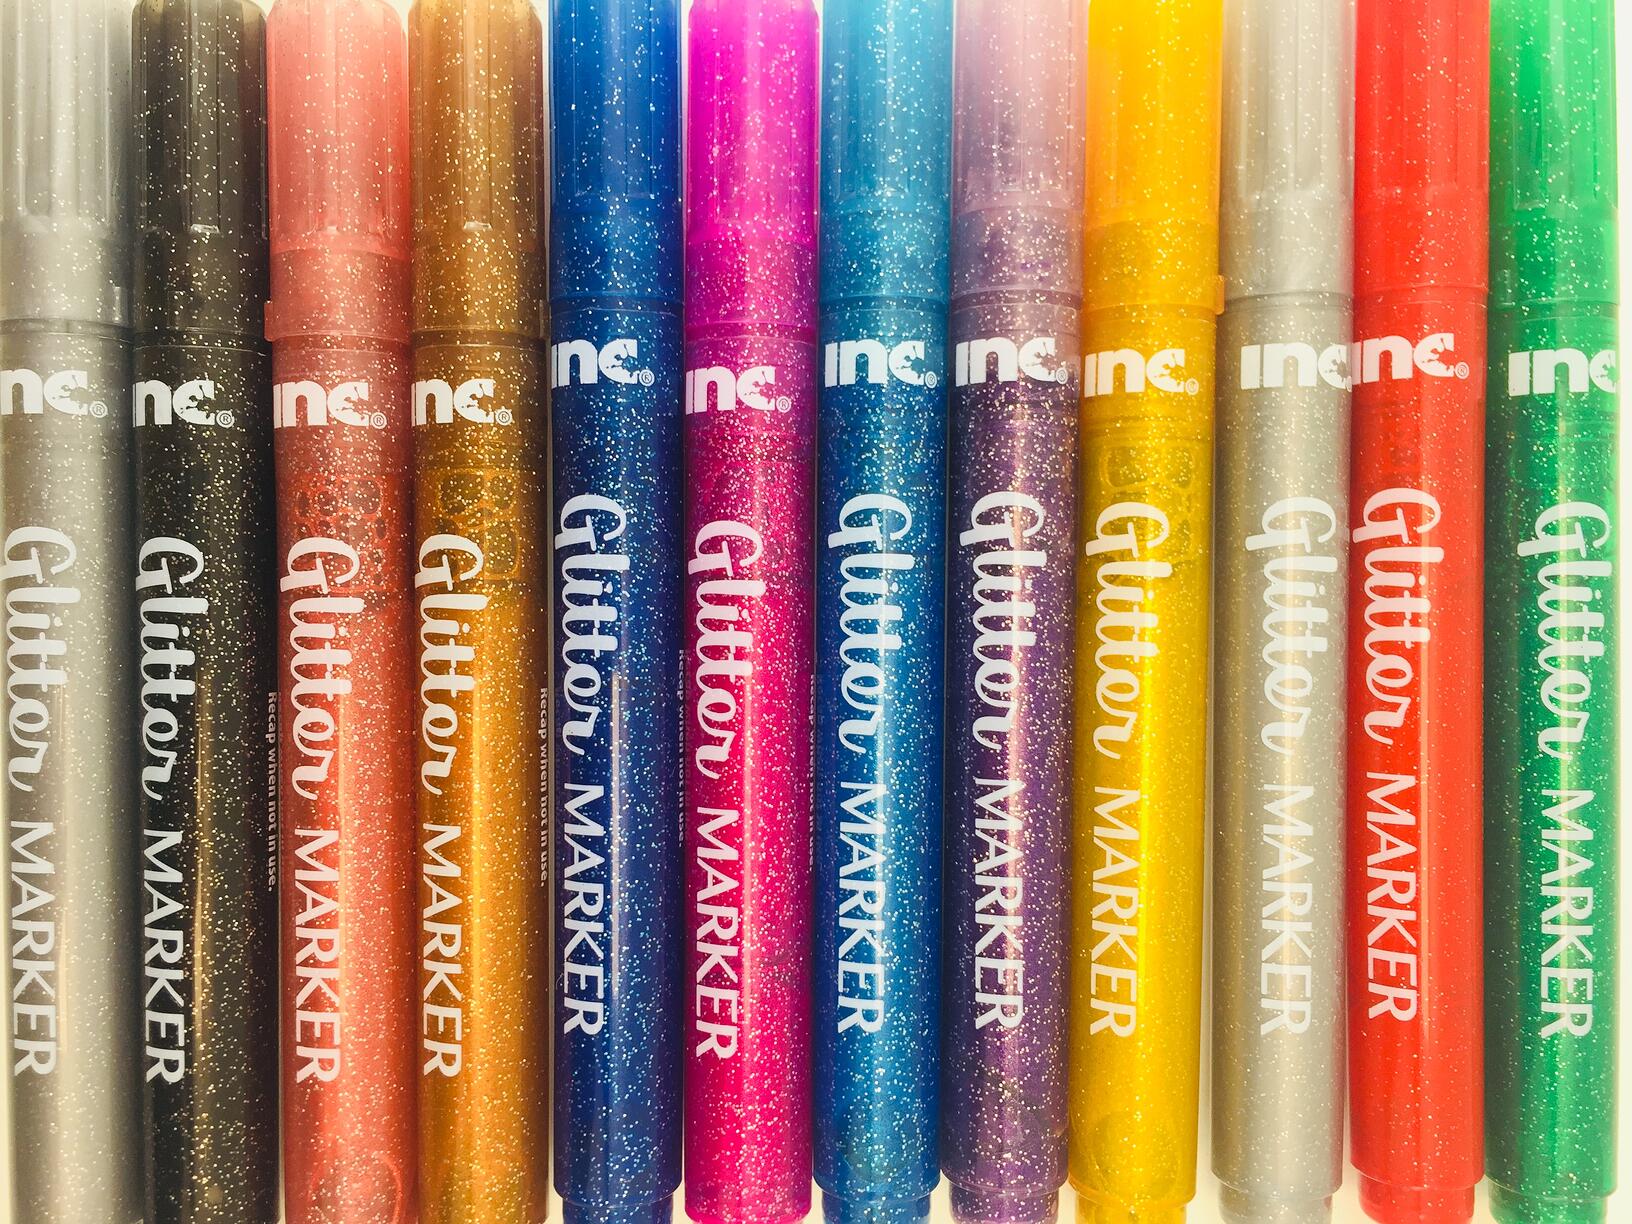 GLITTER MARKERS – GETTING STARTED – Peachtree Playthings